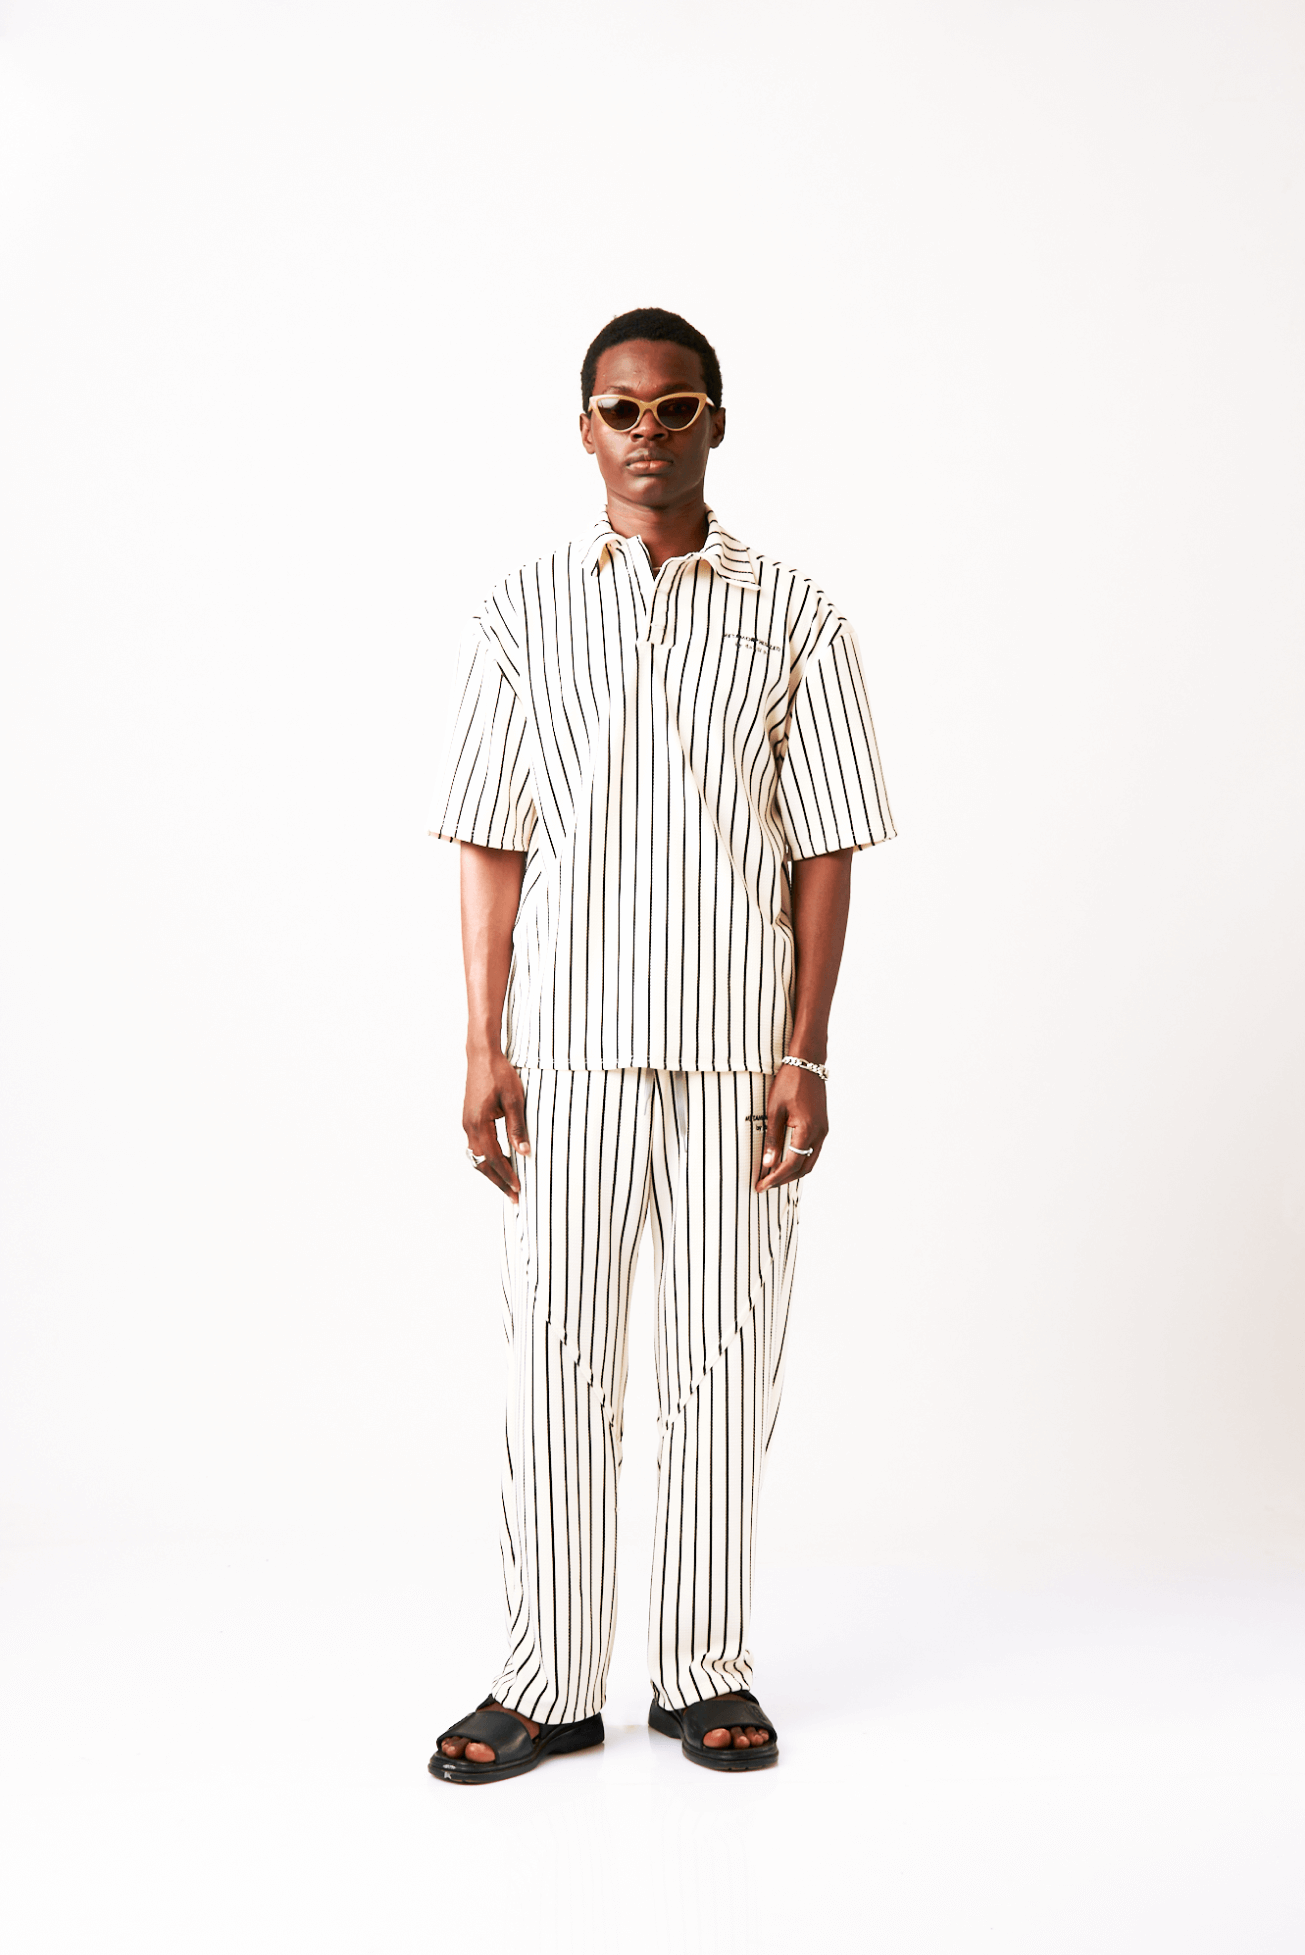 Shop Bahari Polo Striped Shirt by Metamorphisized on Arrai. Discover stylish, affordable clothing, jewelry, handbags and unique handmade pieces from top Kenyan & African fashion brands prioritising sustainability and quality craftsmanship.